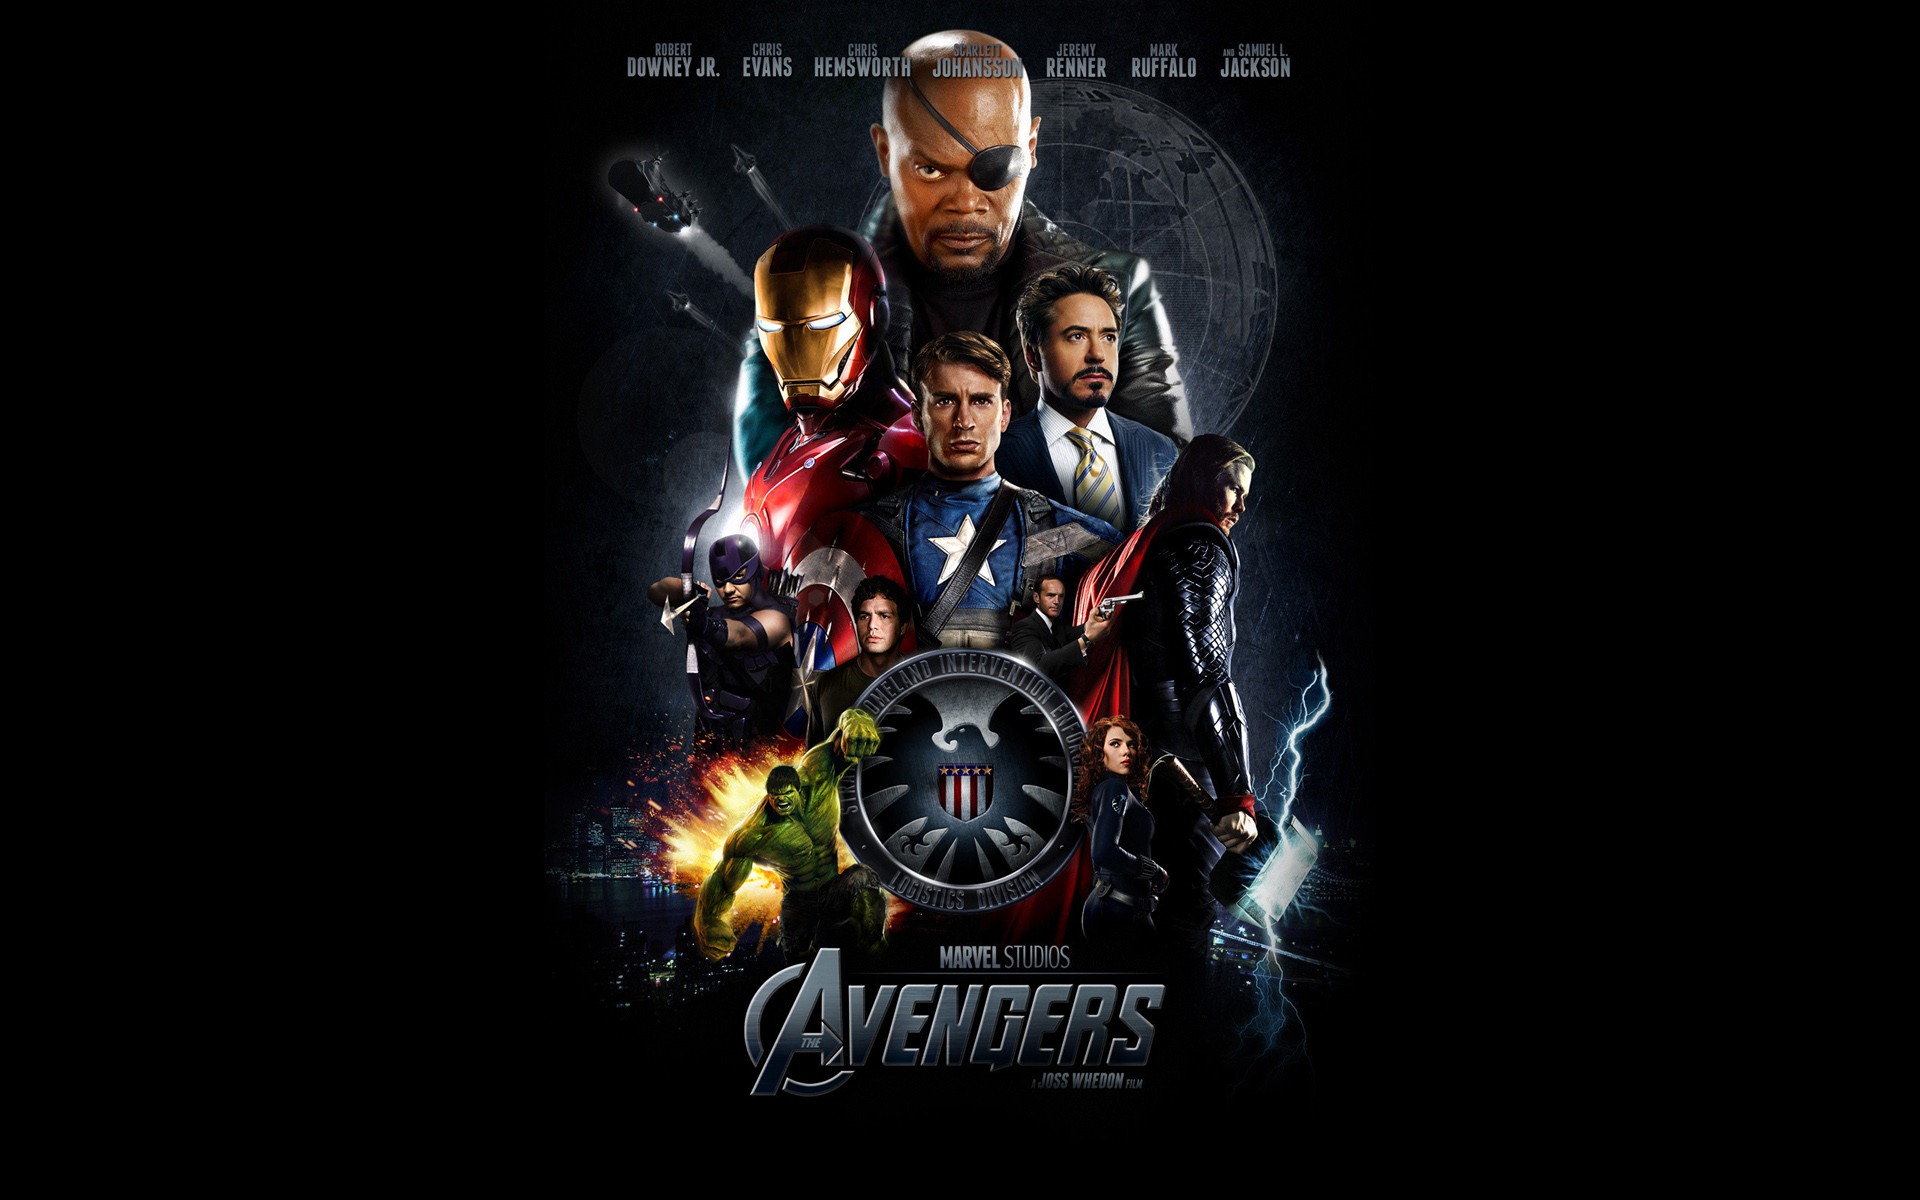 The Avengers 2012 HD wallpapers #16 - 1920x1200